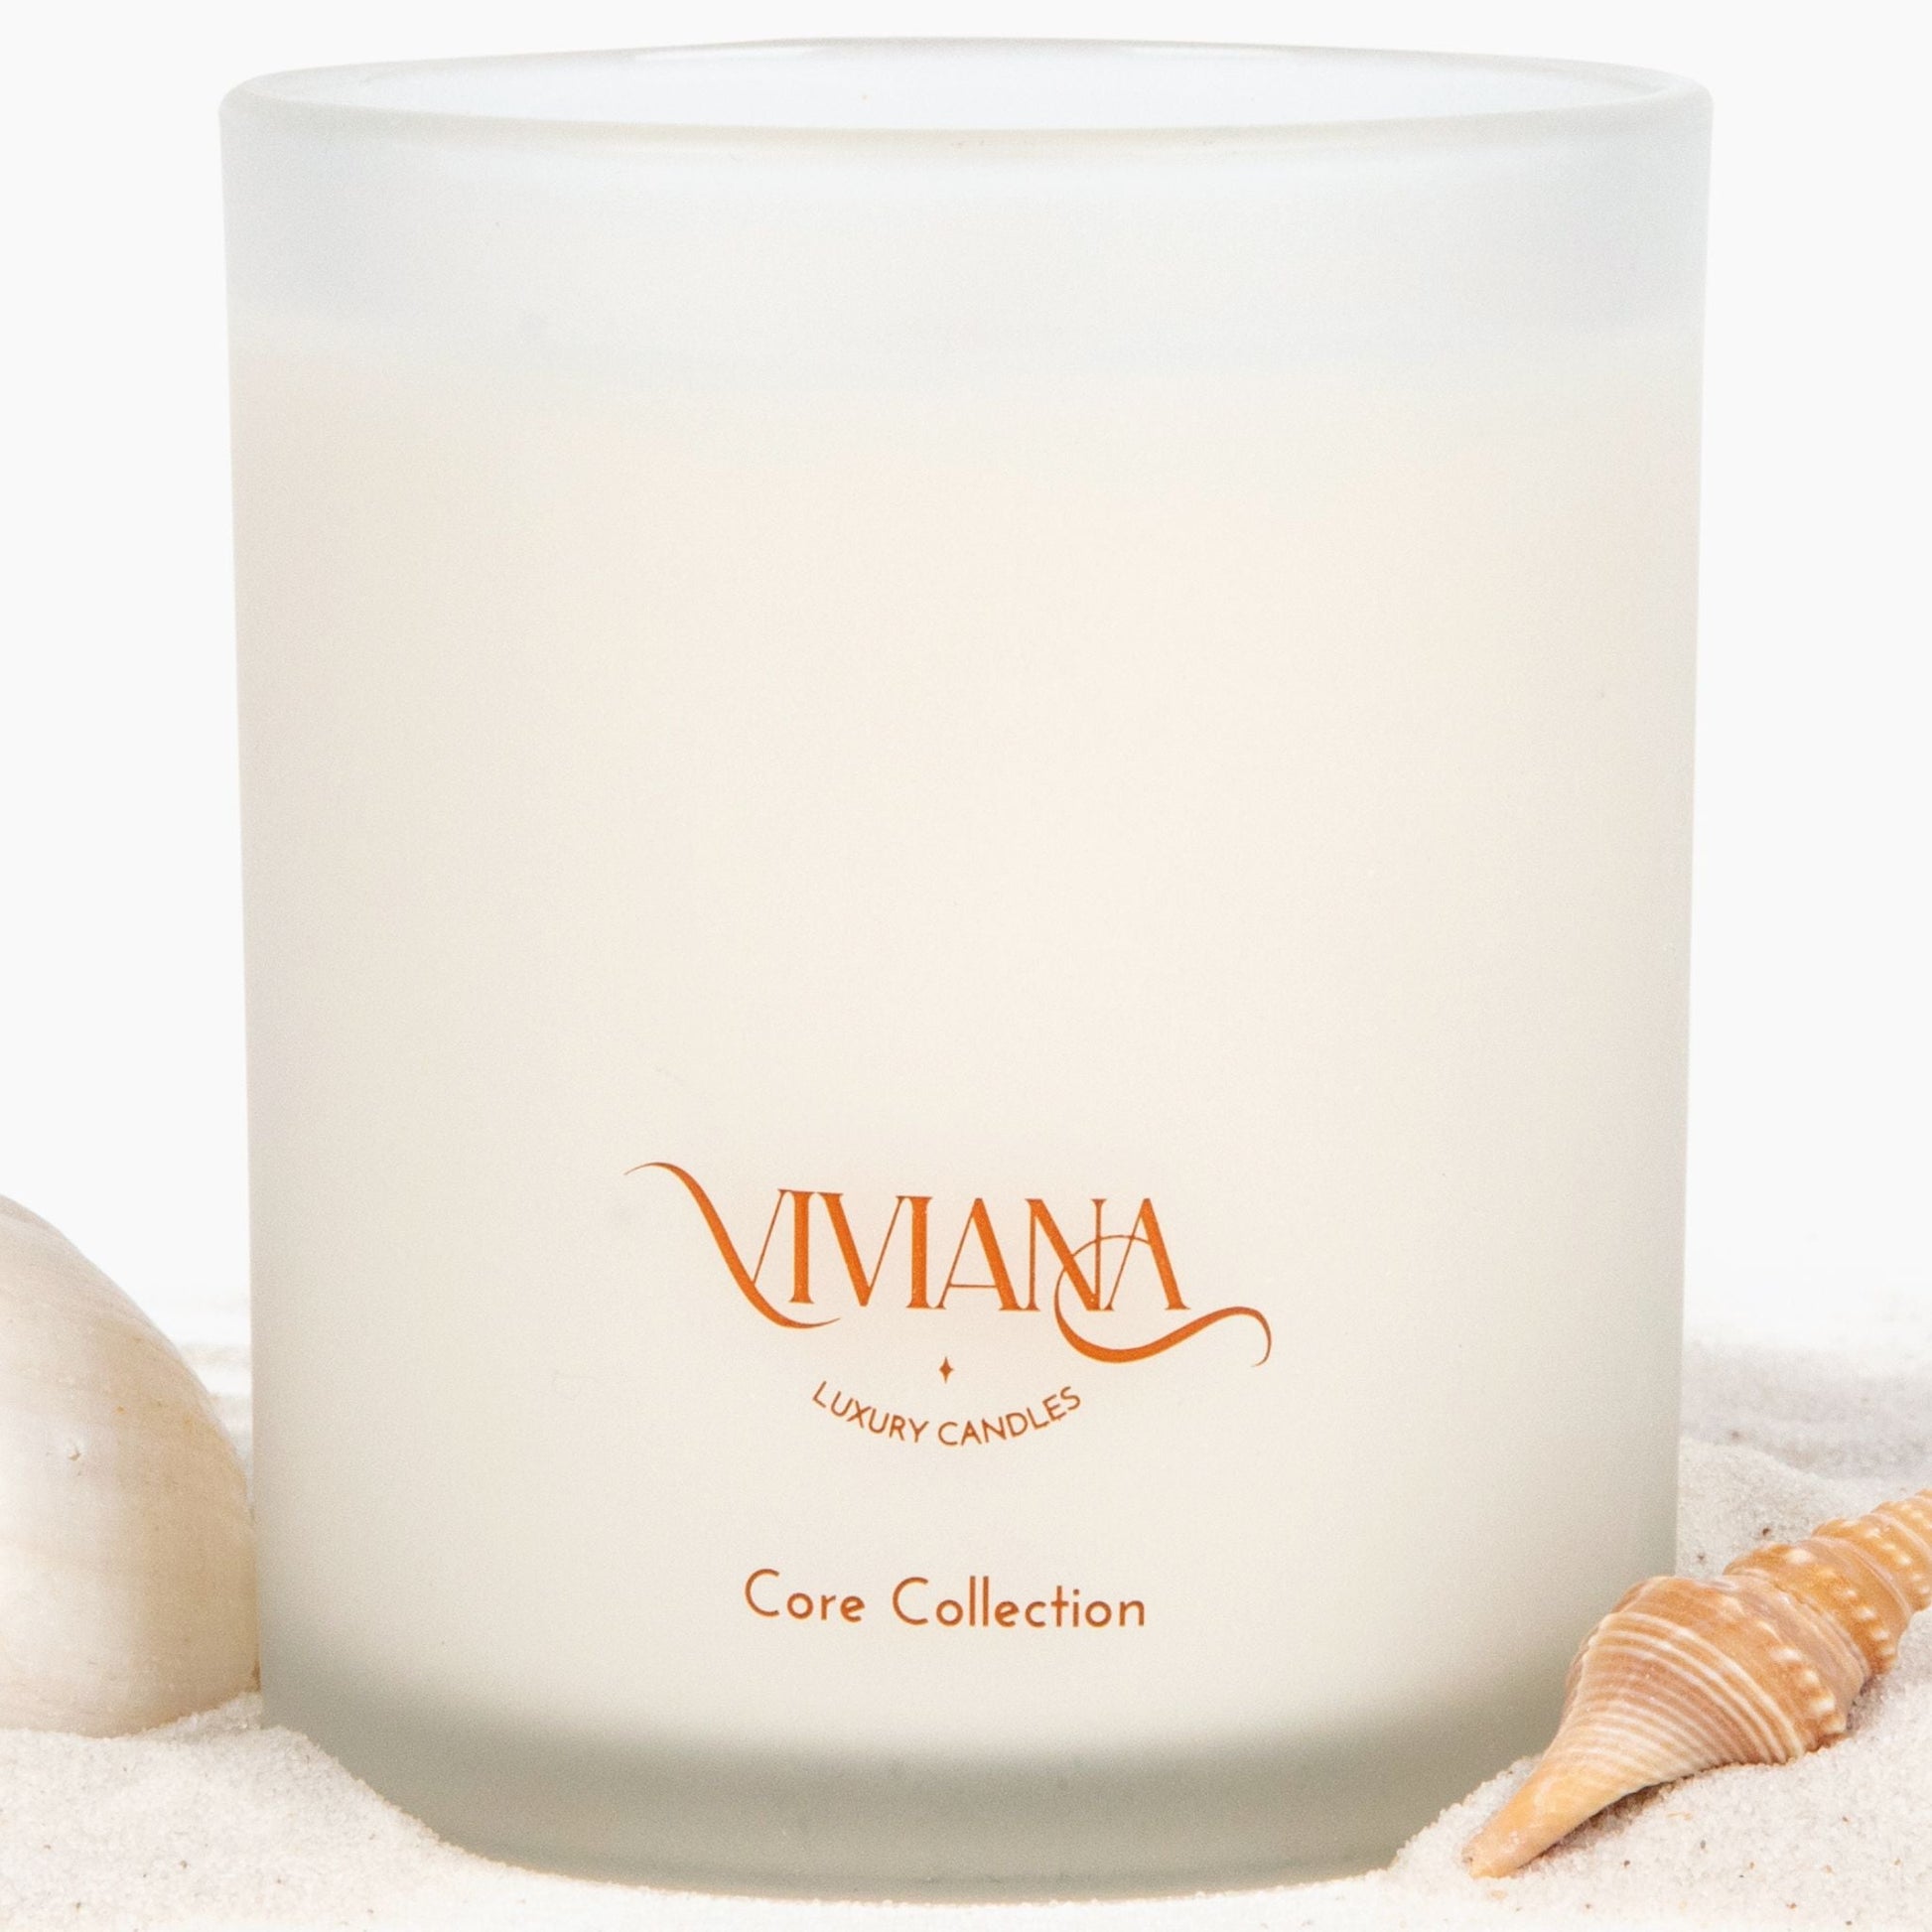 Coconut Beach Soy Wax Candle  Tropical Clean Scented Soy Candles